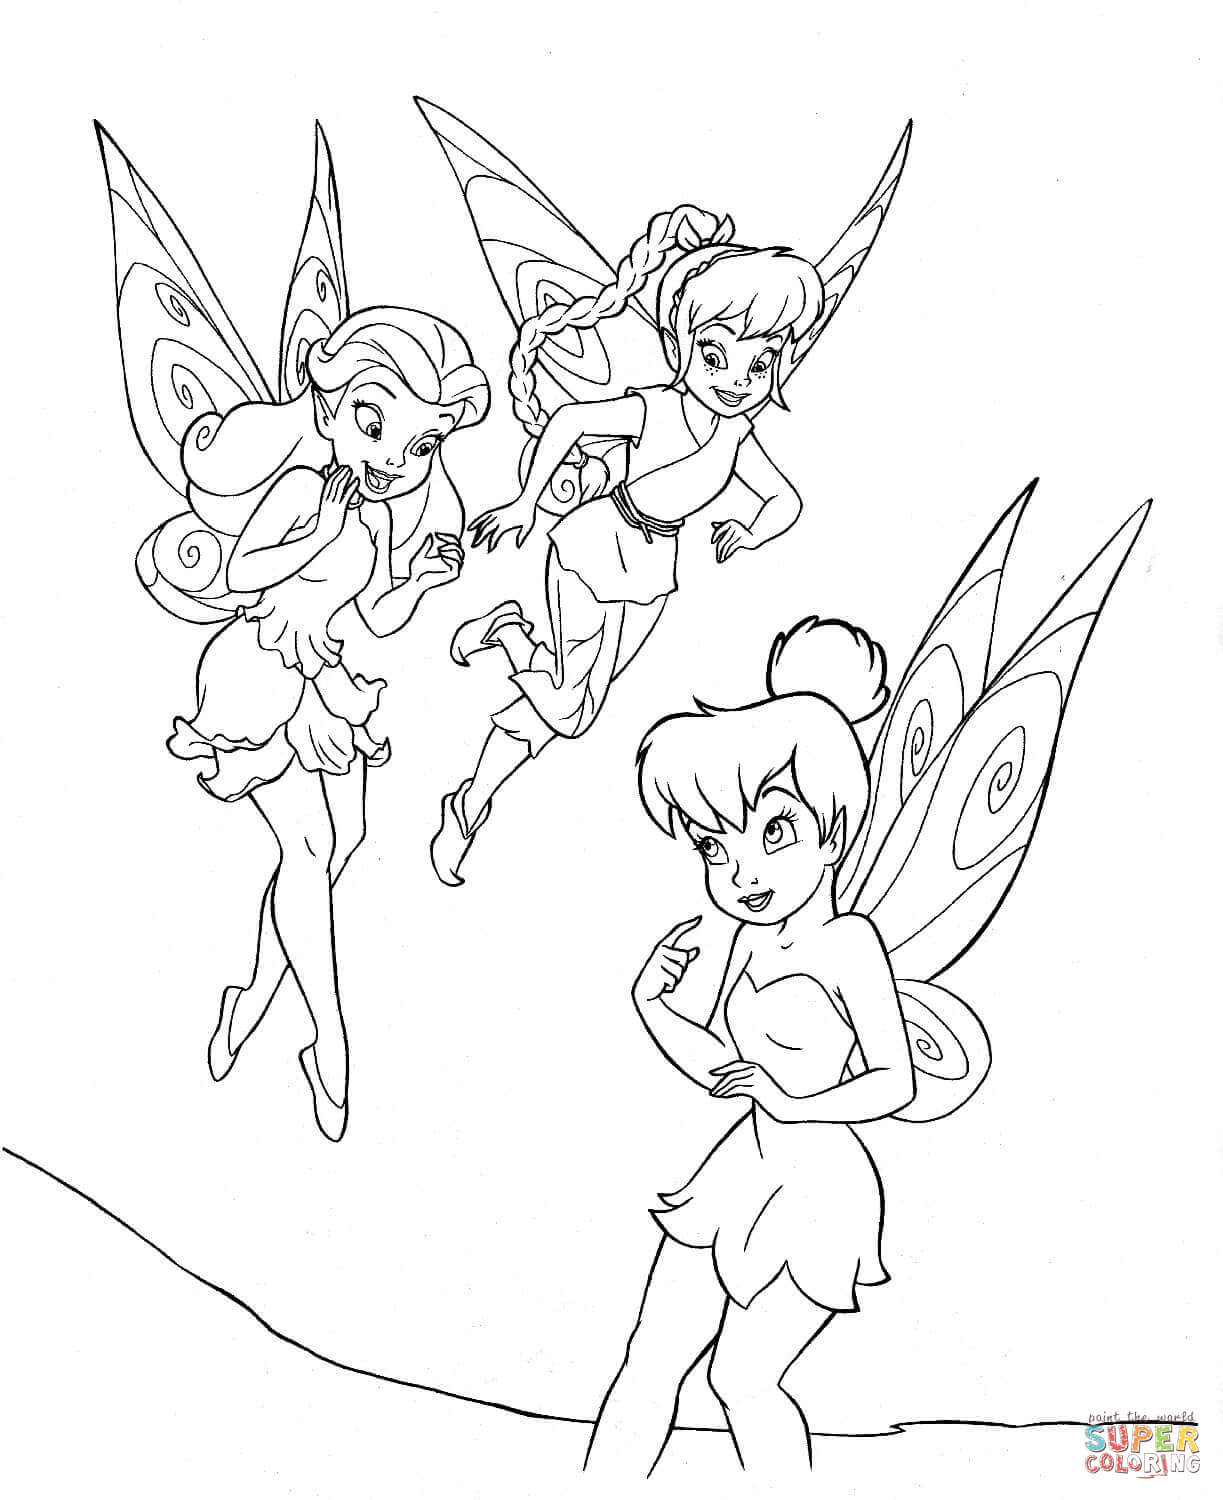 Tinkerbell black and white tinkerbell with friends coloring page free printable coloring pages